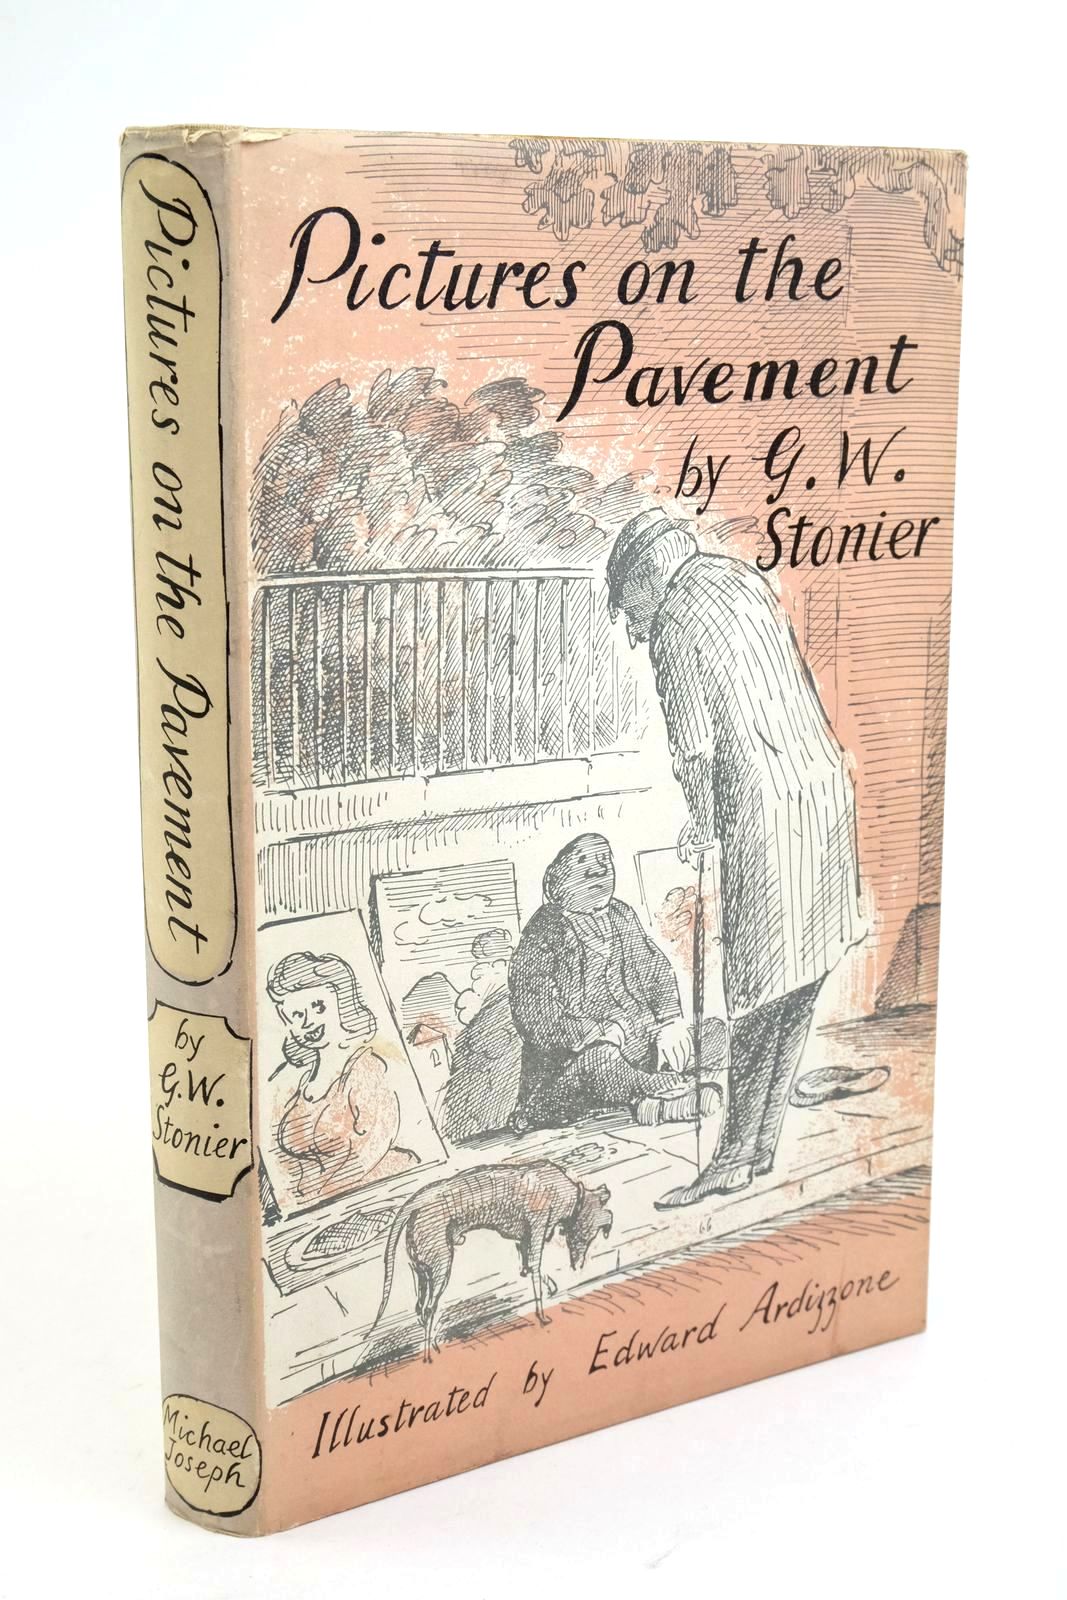 Photo of PICTURES ON THE PAVEMENT written by Stonier, G.W. illustrated by Ardizzone, Edward published by Michael Joseph (STOCK CODE: 1322231)  for sale by Stella & Rose's Books